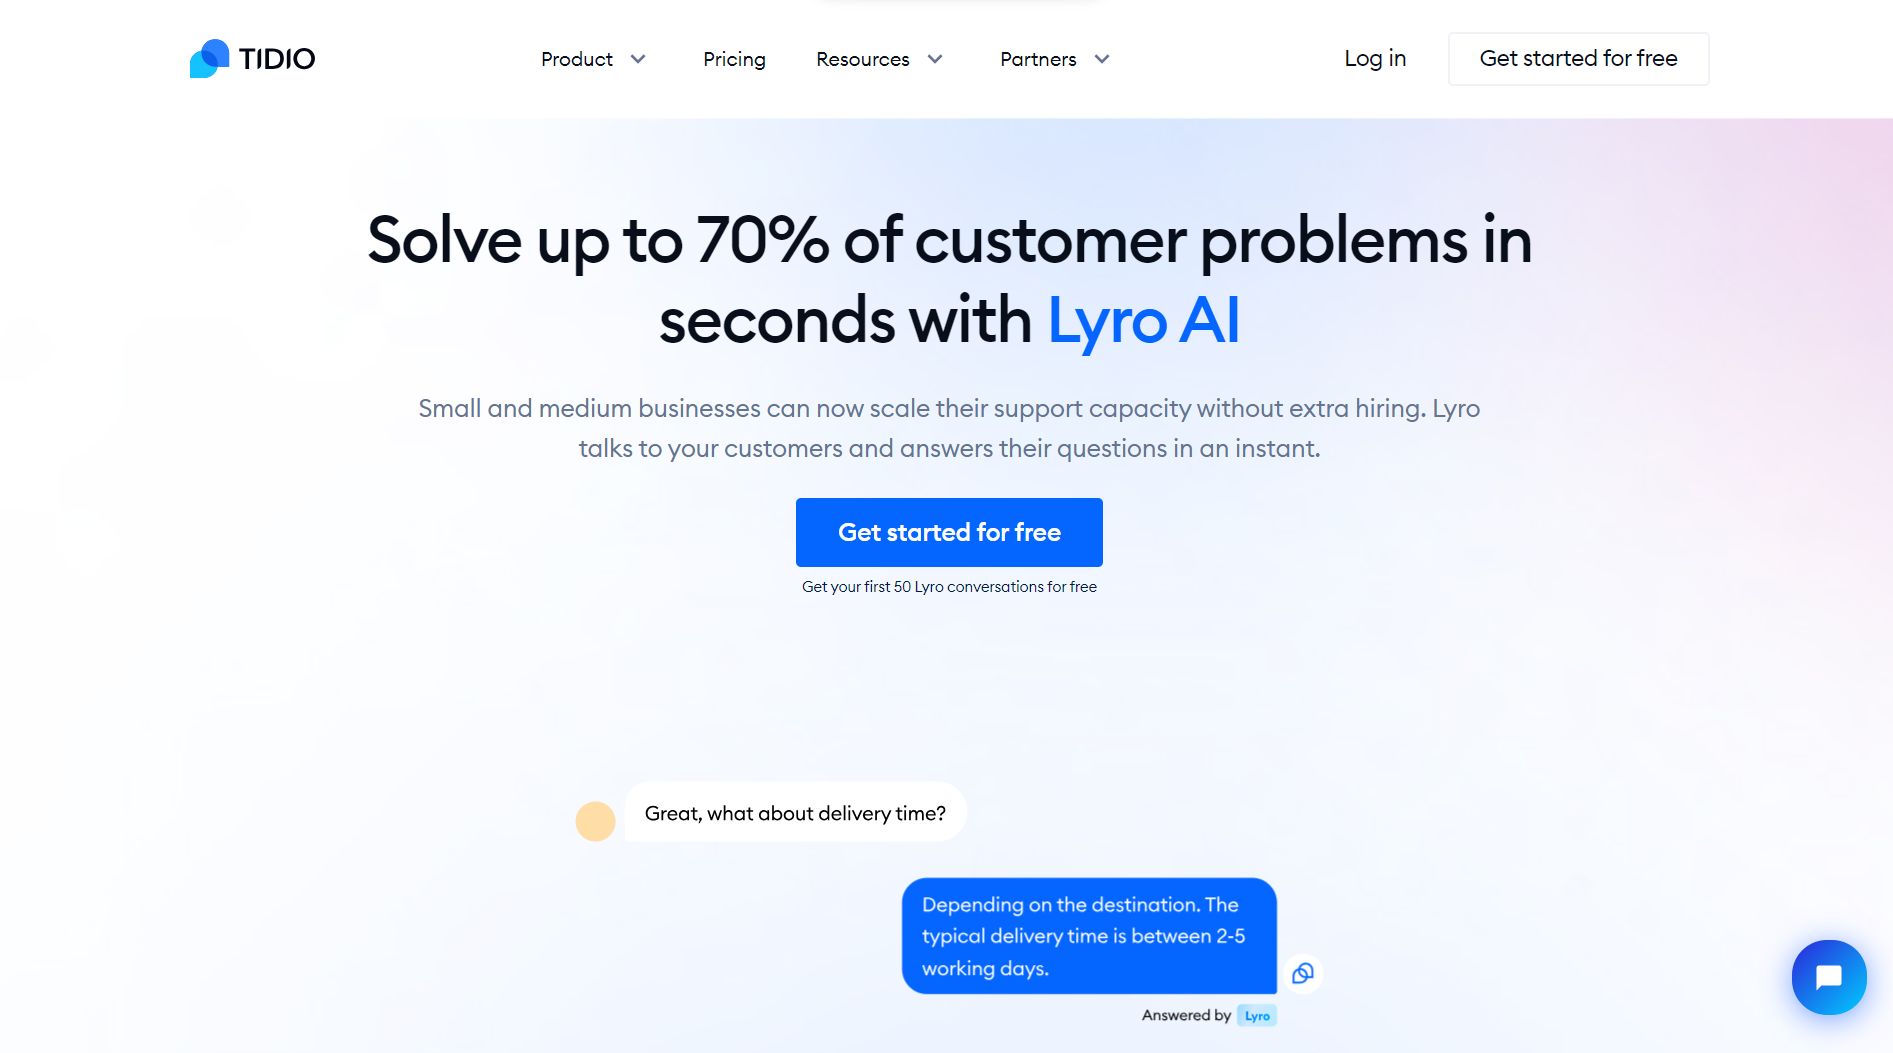 Tidio’s product page for Lyro AI chatbot